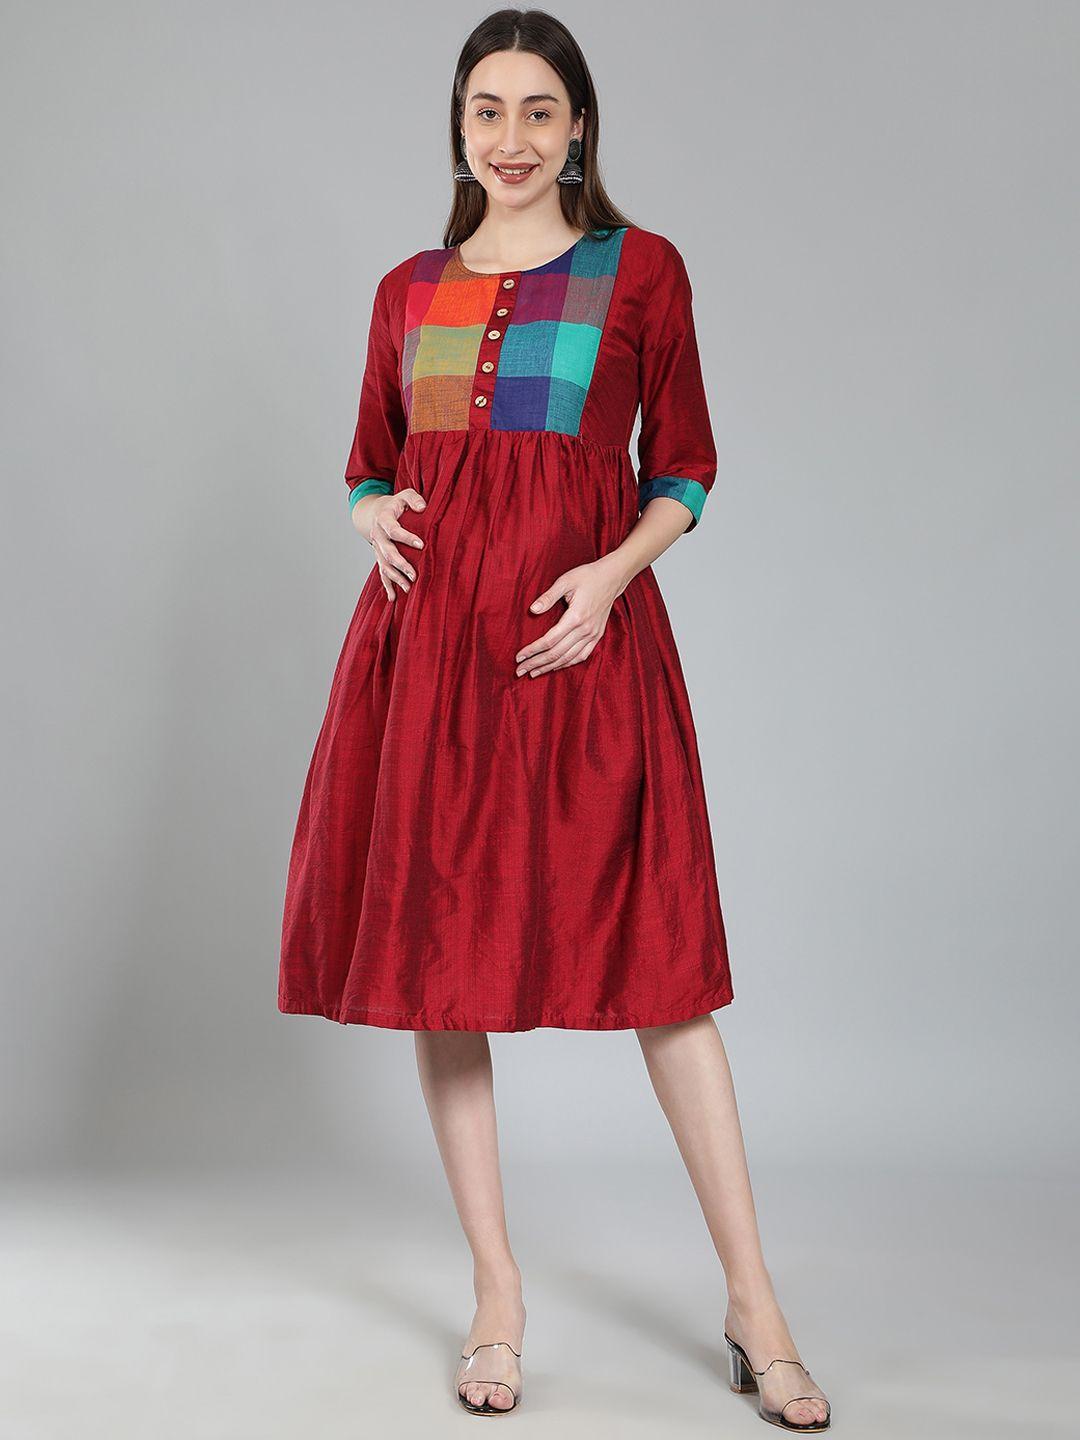 cot'n soft colourblocked maternity fit & flare ethnic dress